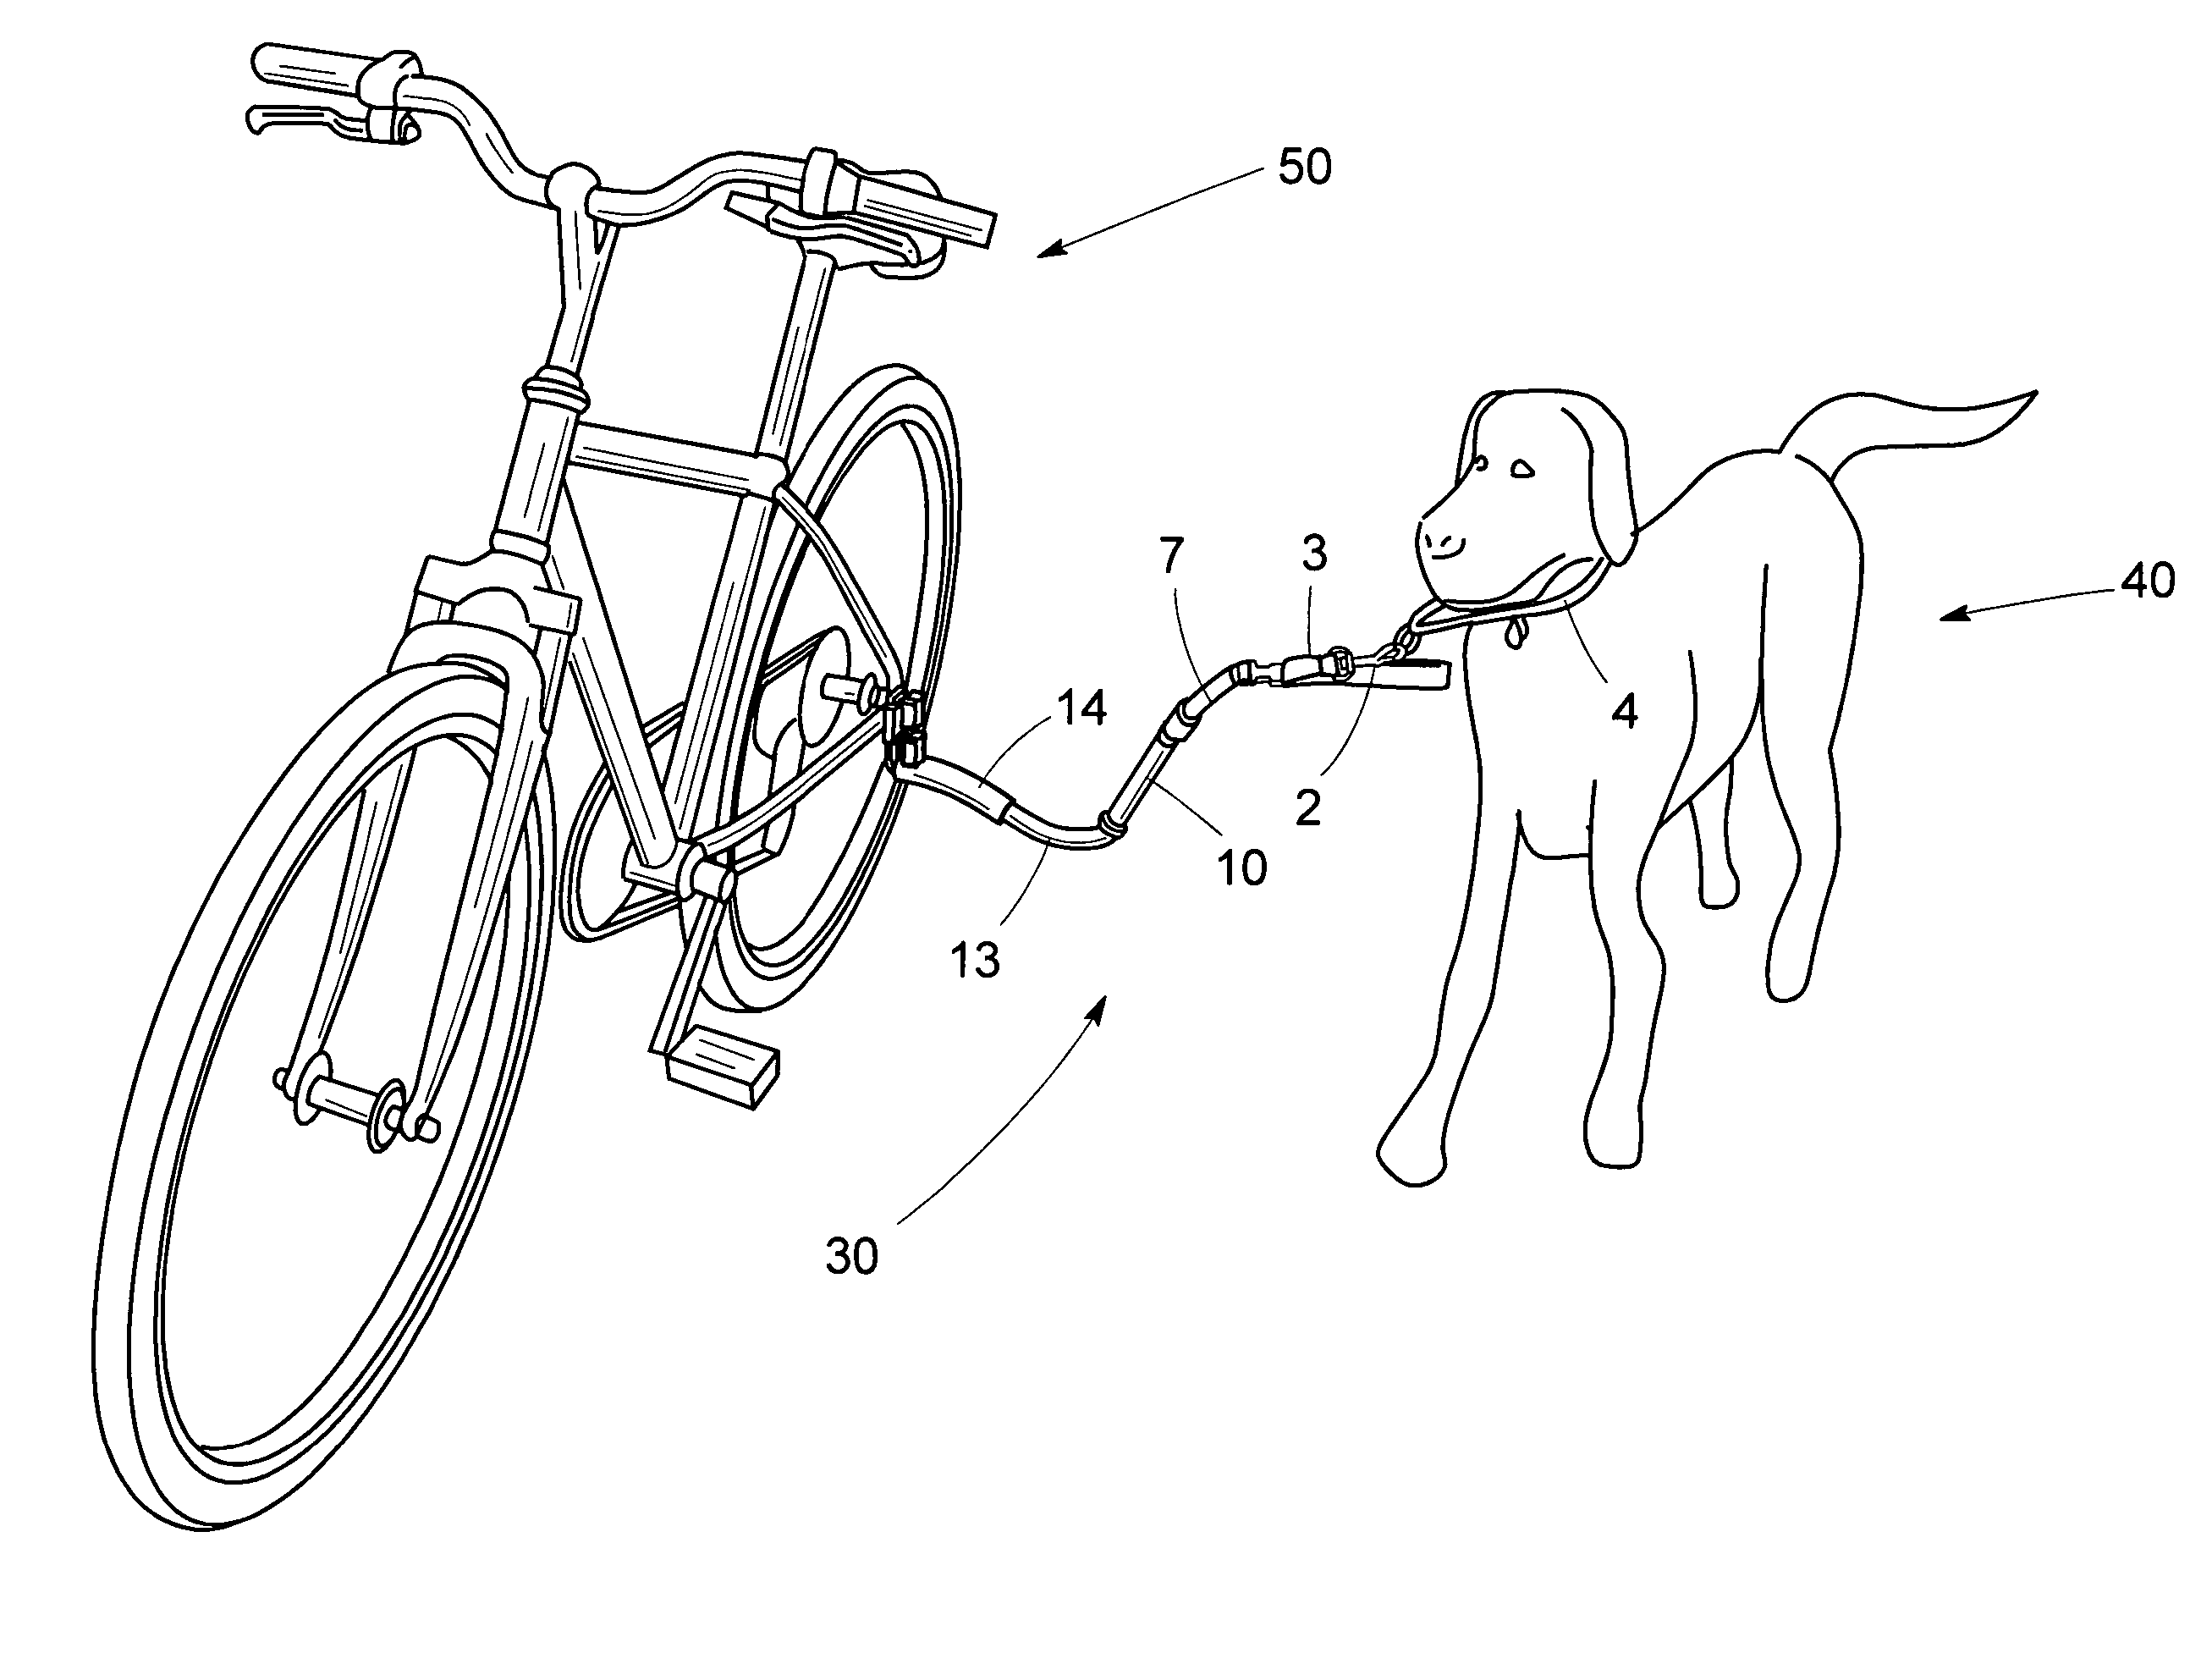 Dog leash for use on bicycle